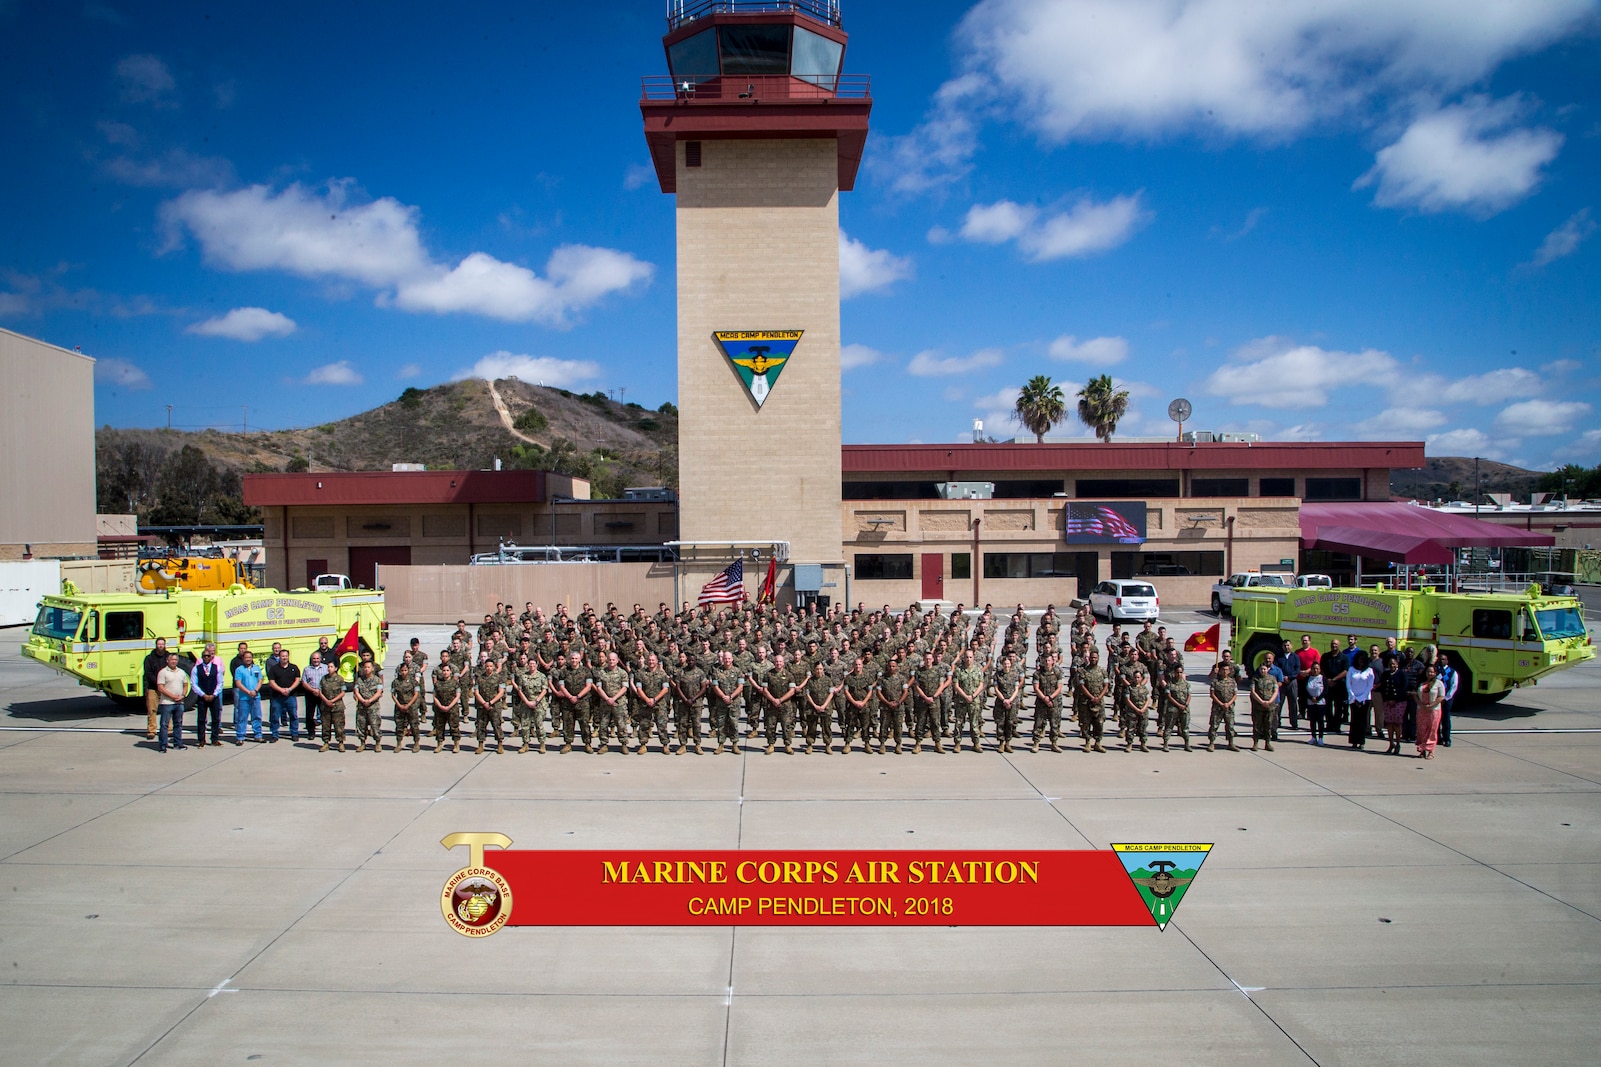 Marine Corps Air Station Camp Pendleton Command Photo and Award Ceremony